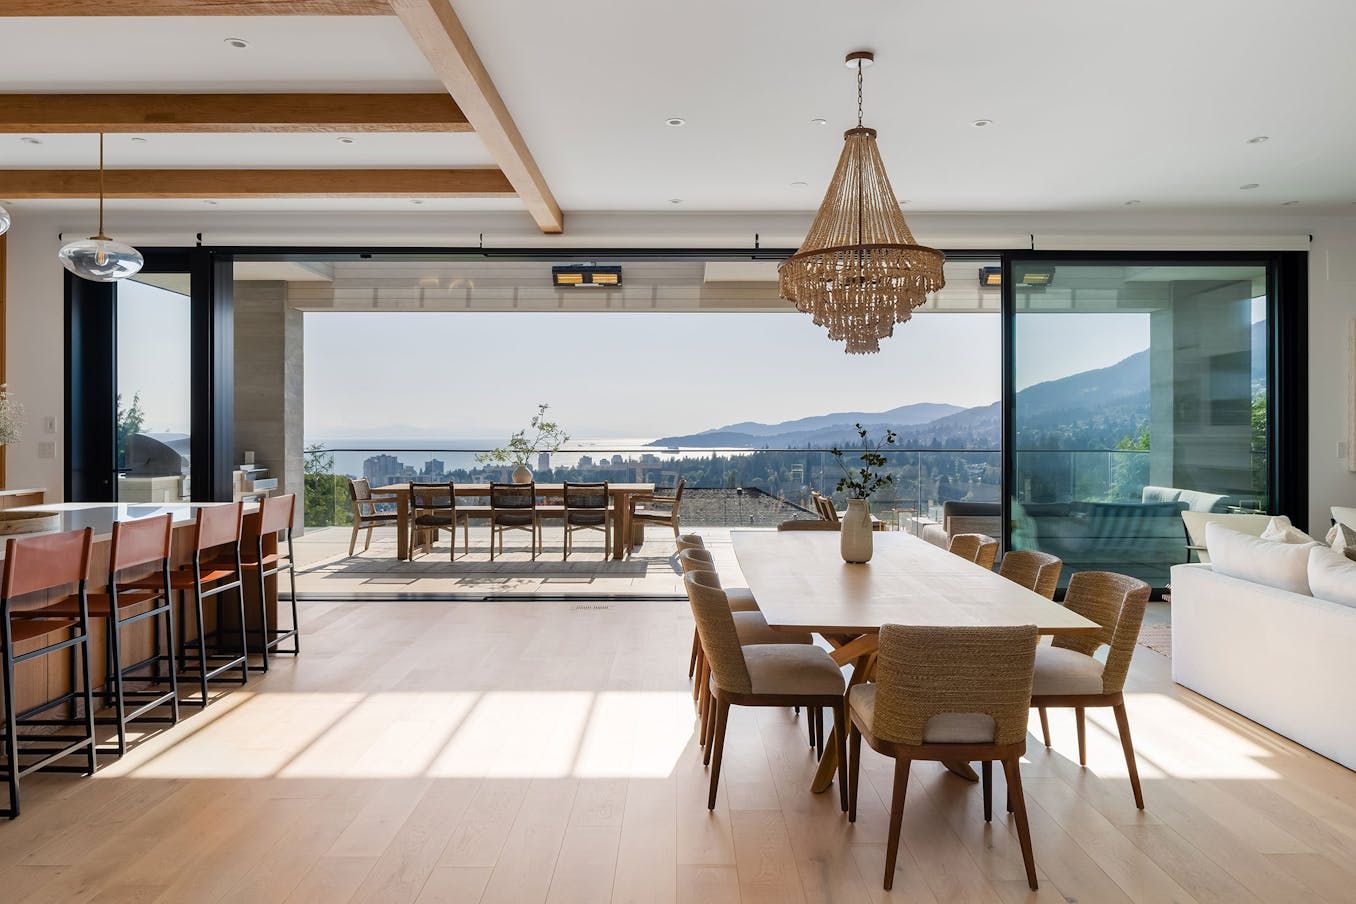 A modern kitchen and dining room with fully automated large opening glass walls, offering breathtaking views of the ocean